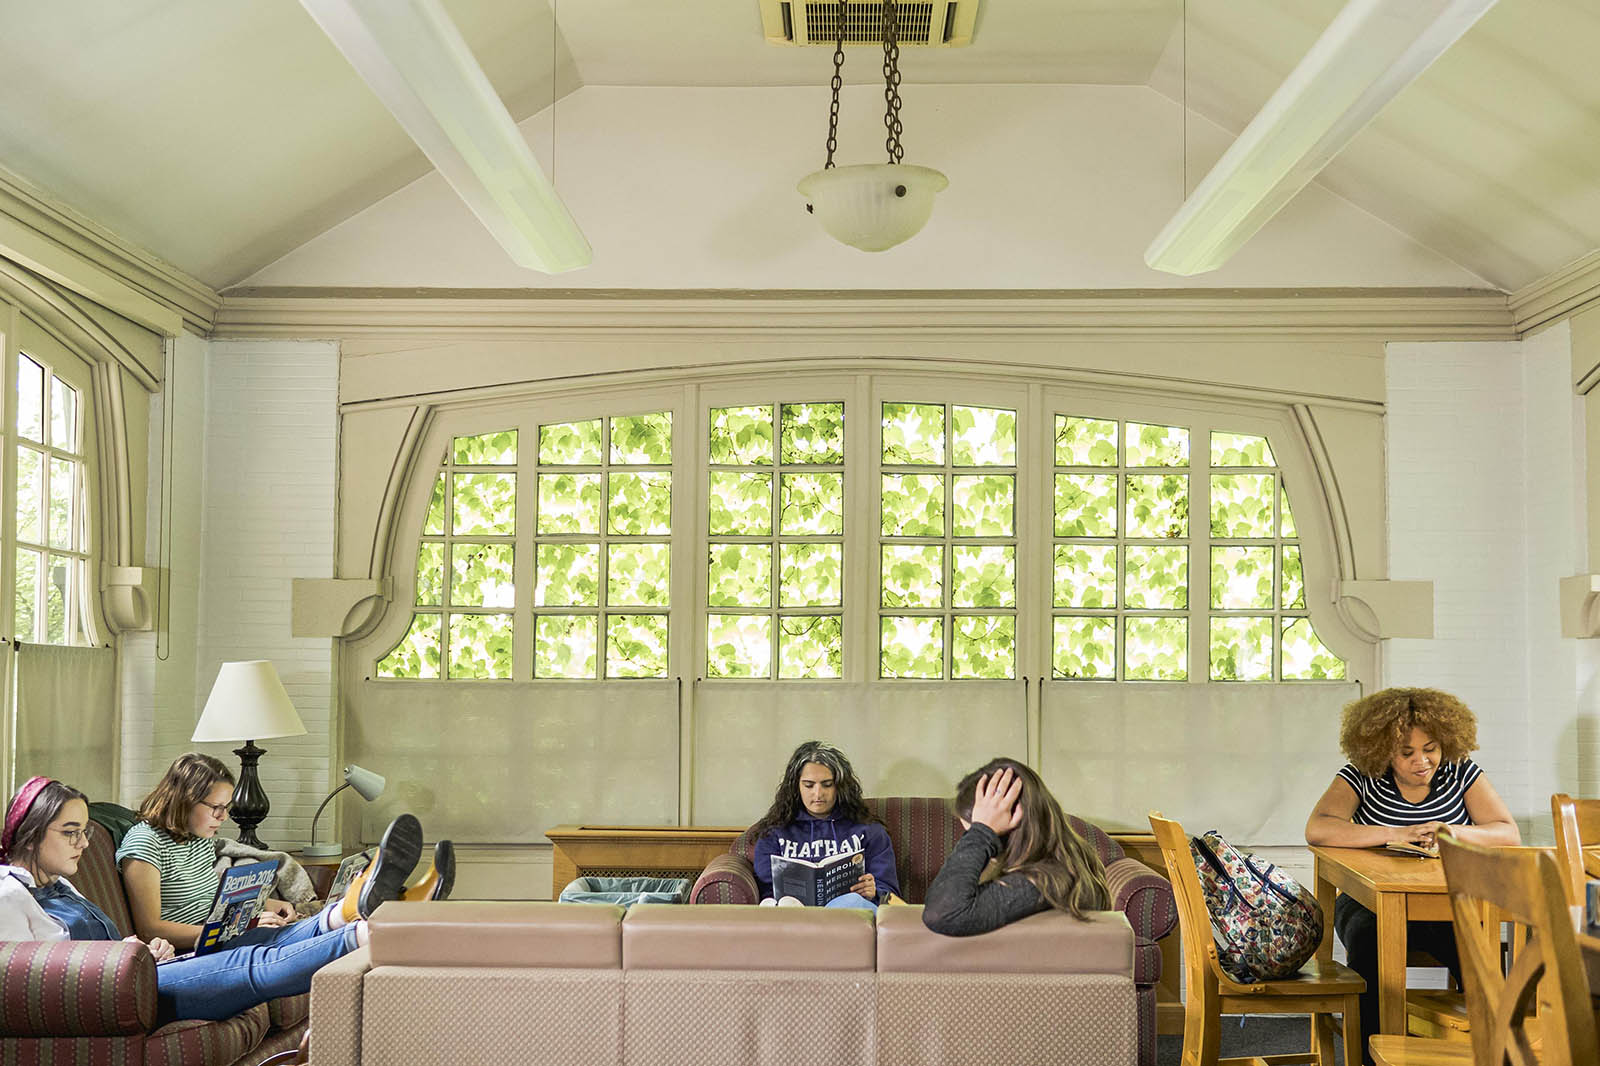 Photo of students sitting inside a residence hall study room on Chatham University's Shadyside Campus